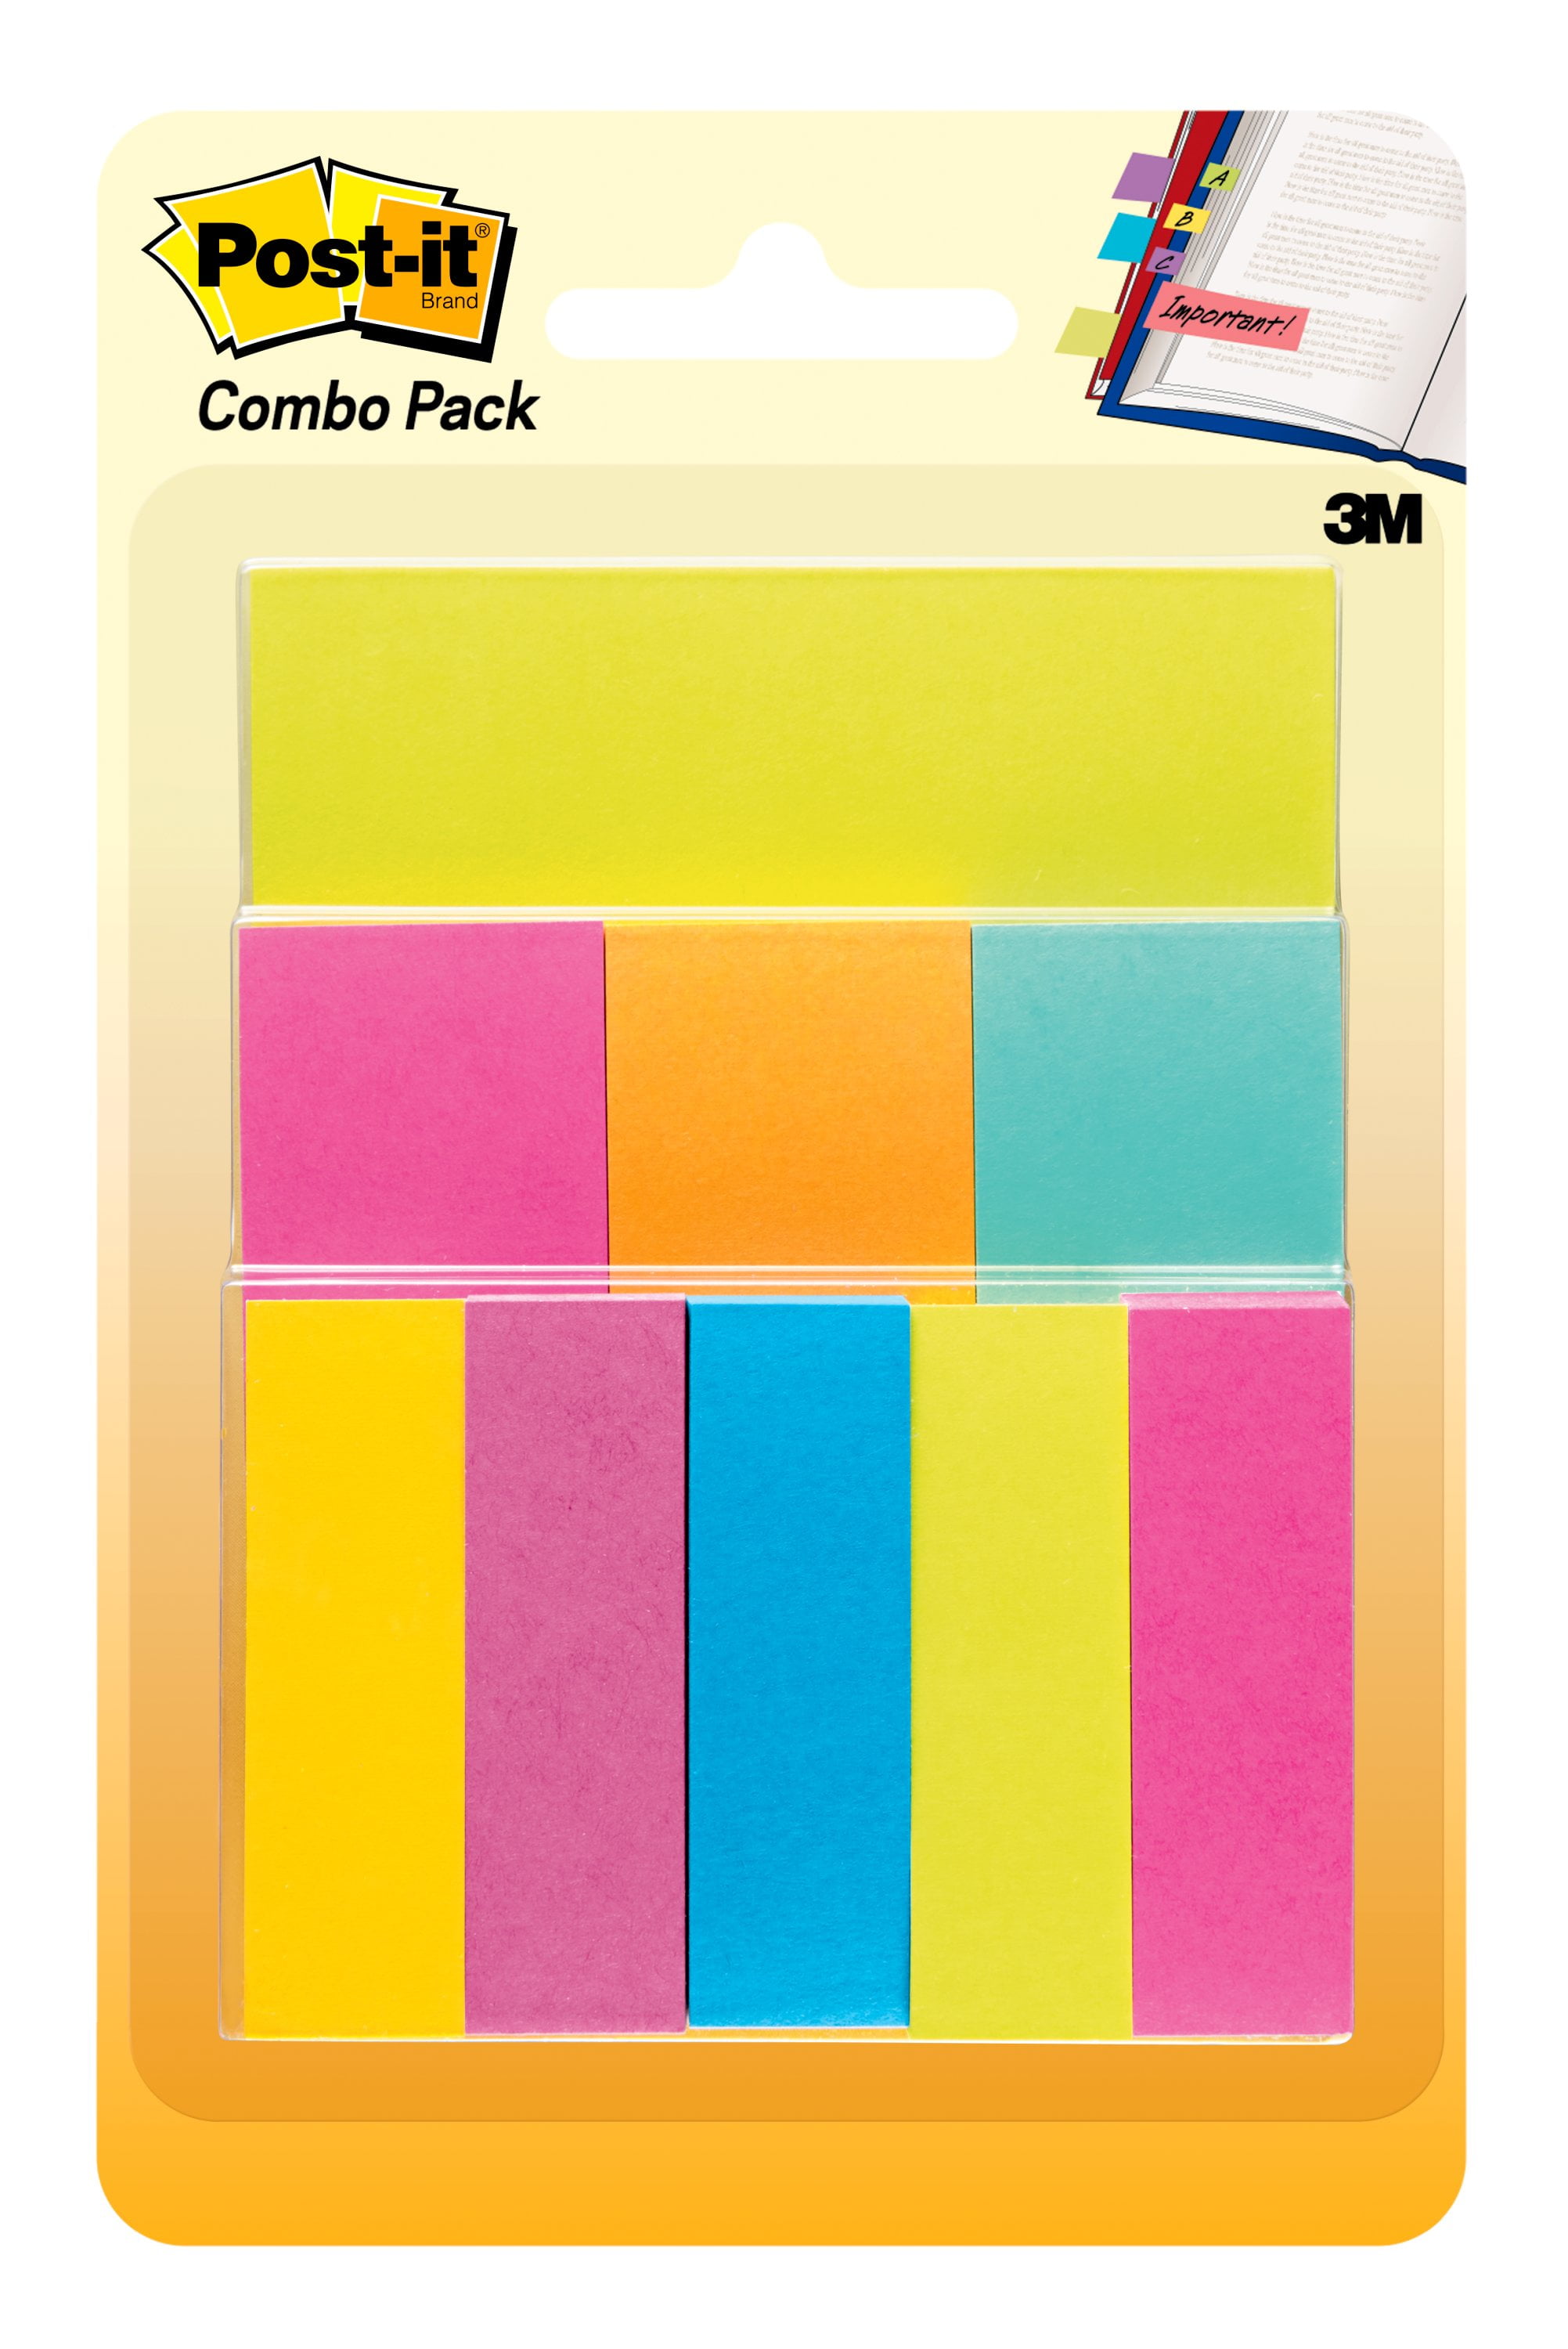 10/Color Post-it Tabs 4 Packs of 40/Dispenser, 4 Colors .625 x 1.5 Inches 